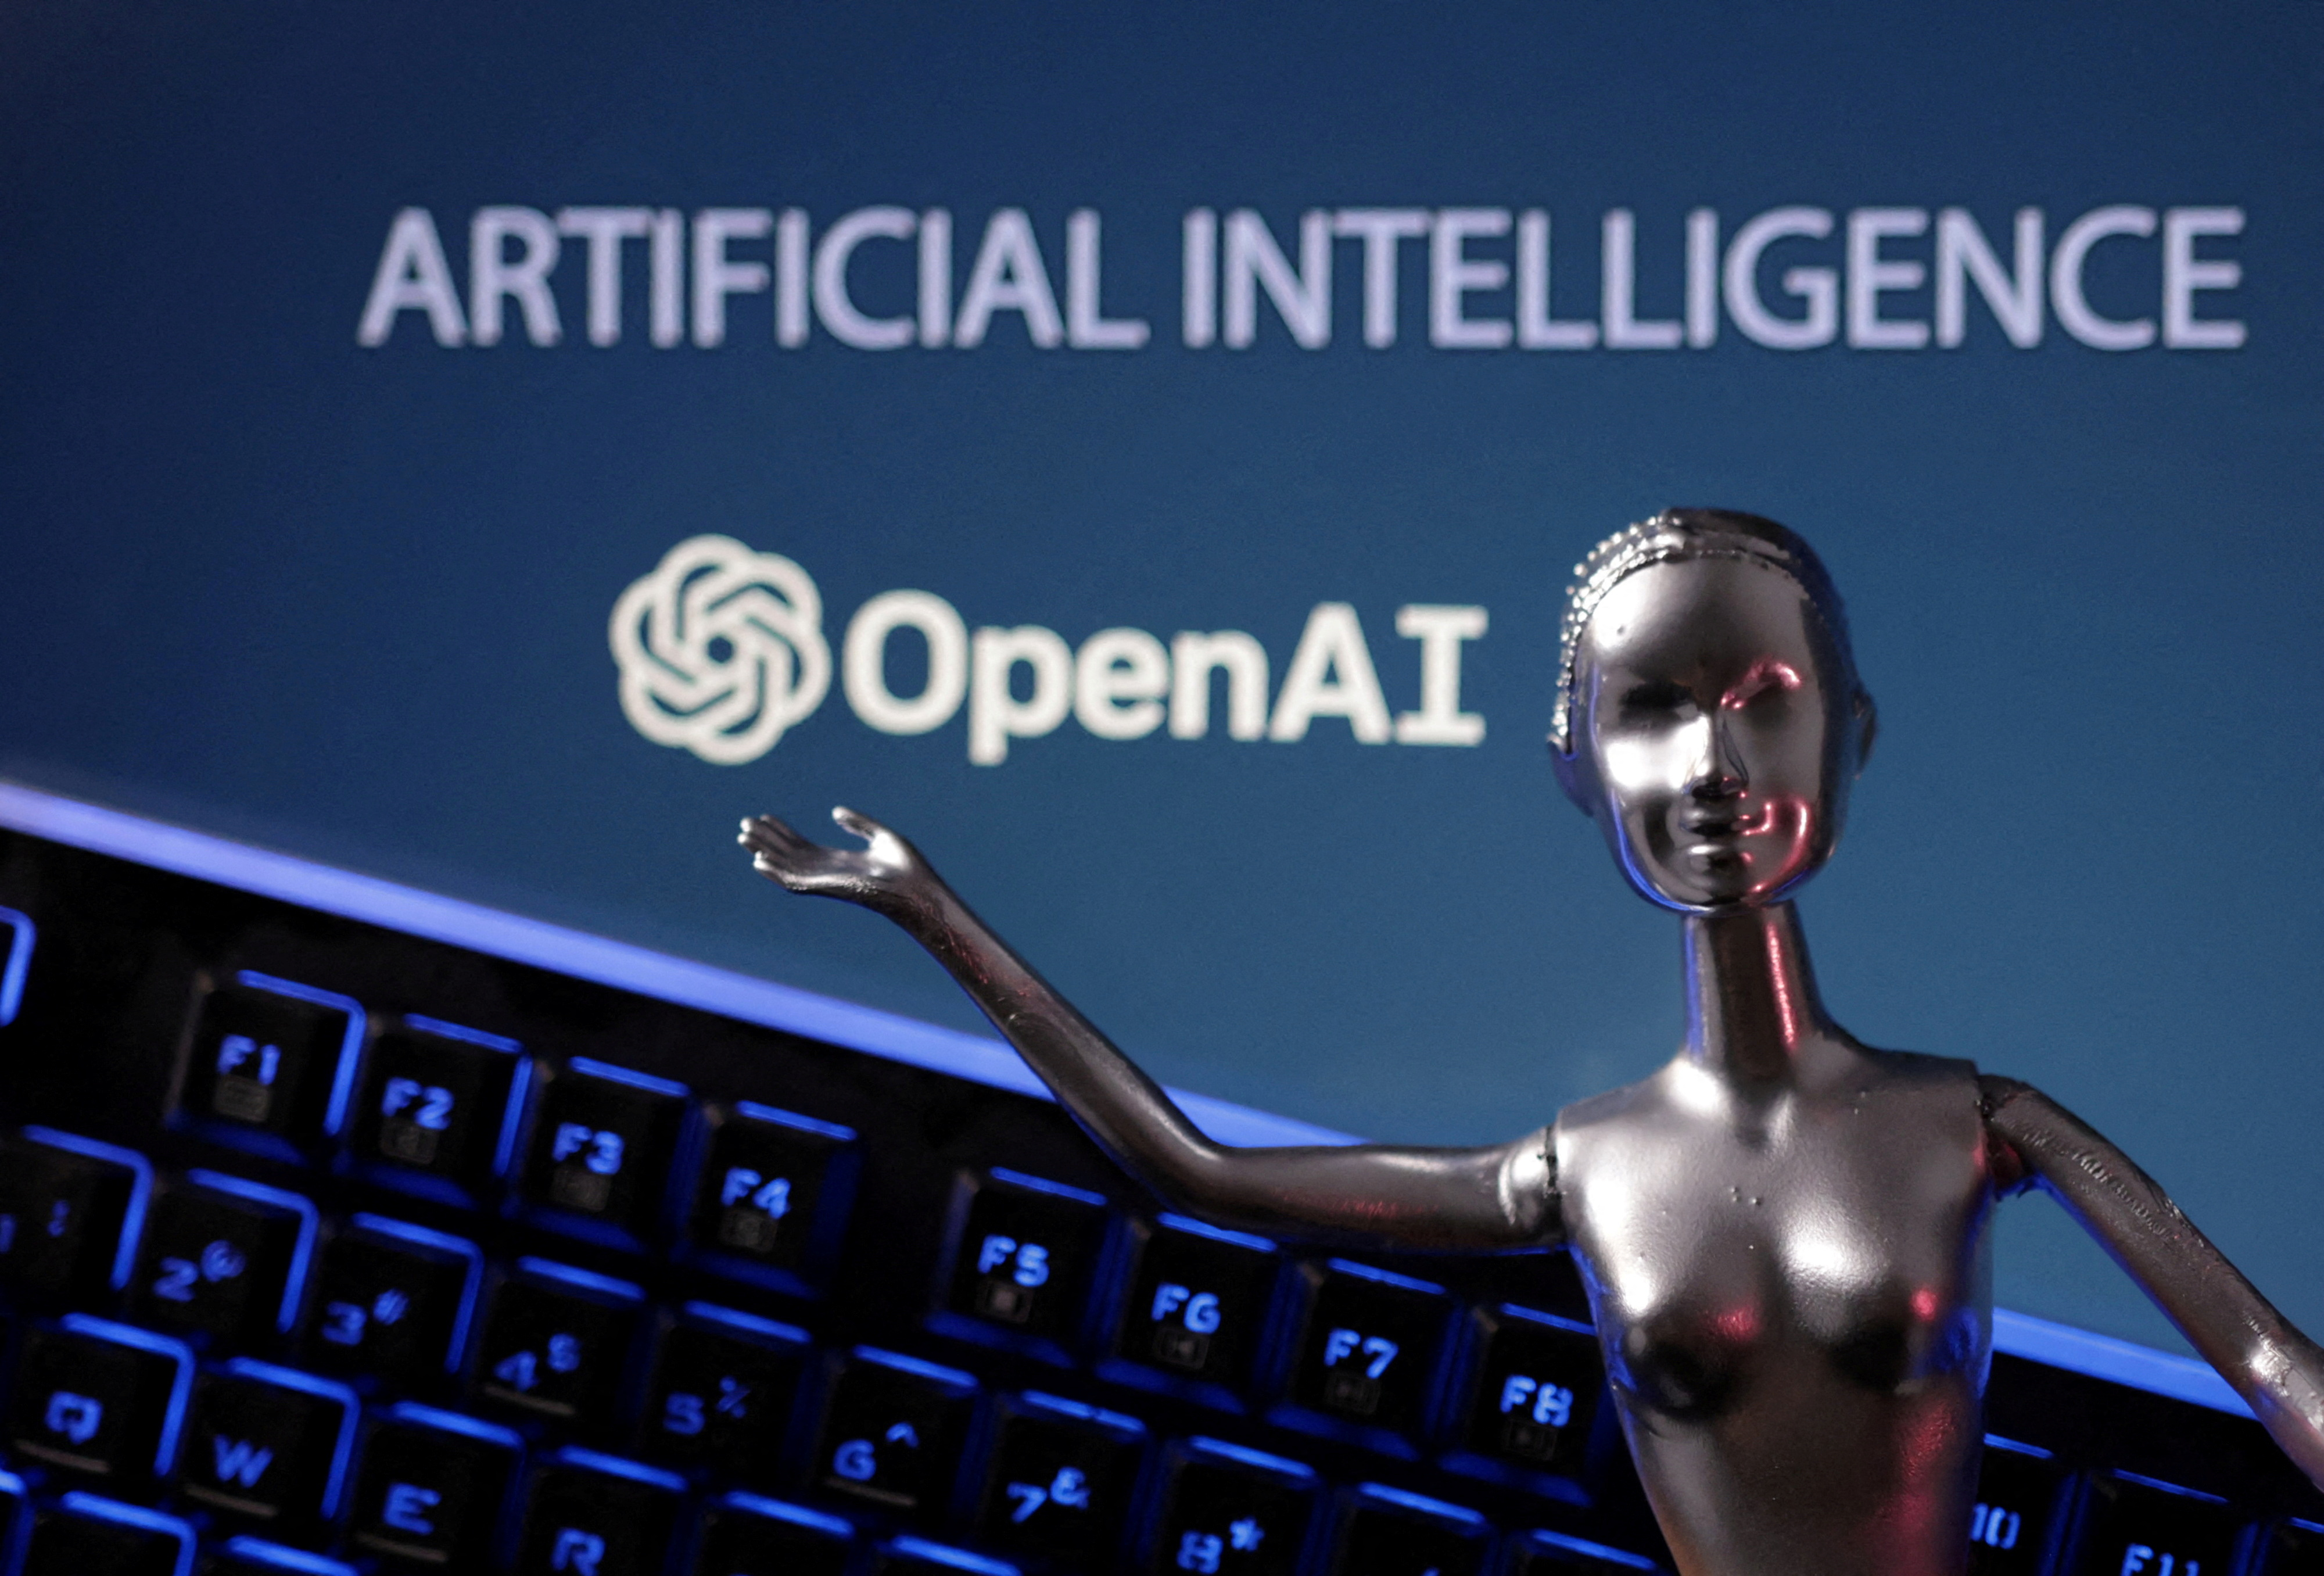 Illustration shows OpenAI logo and AI Artificial Intelligence words